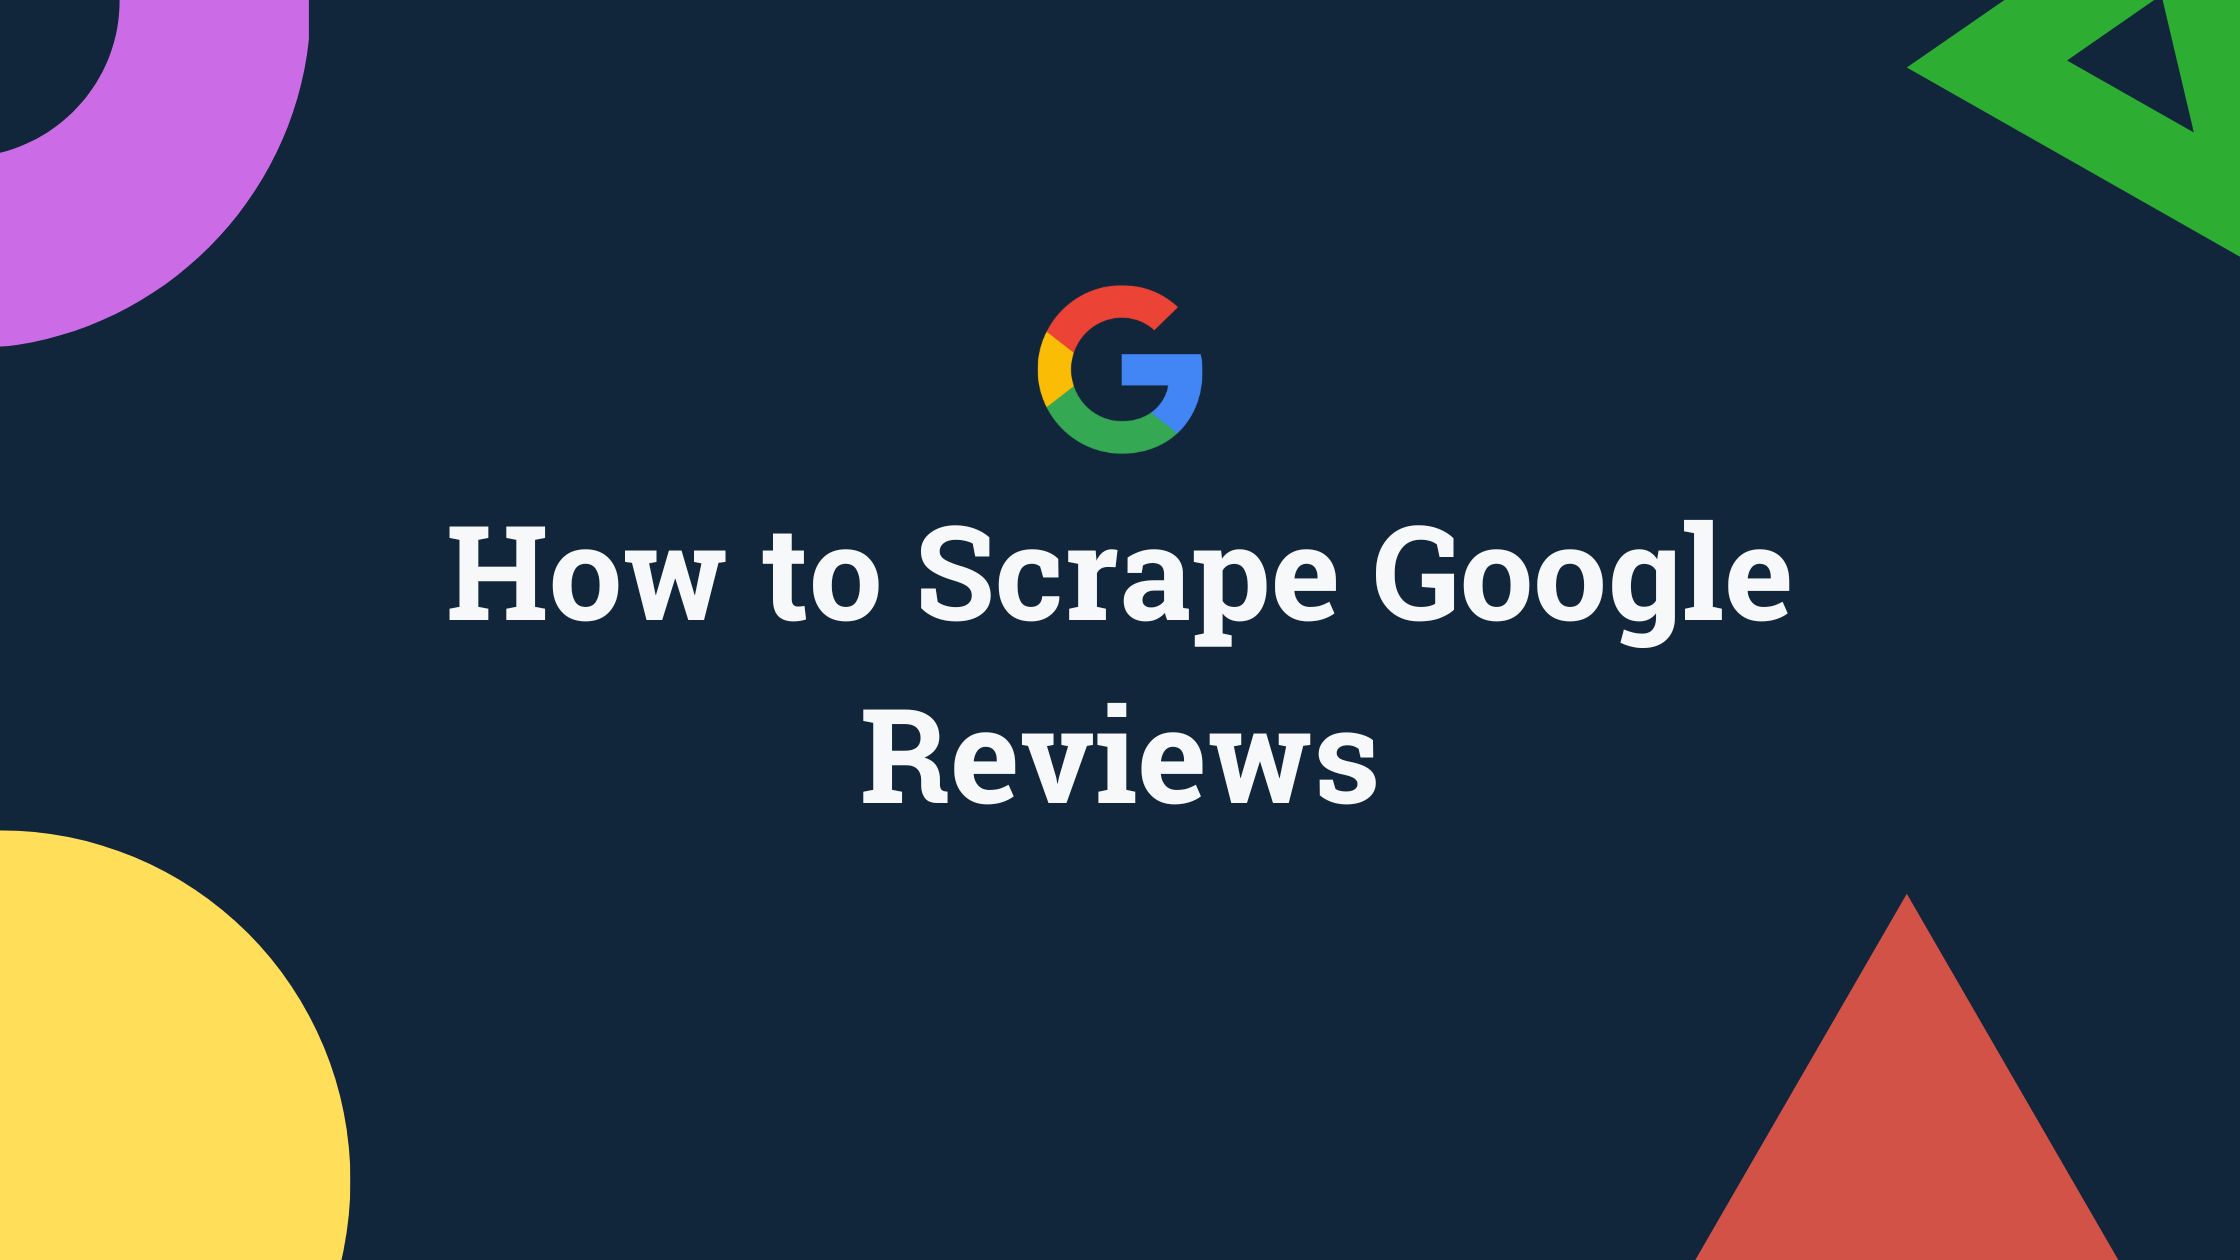 How to Scrape Google Reviews Code and No Code Approaches